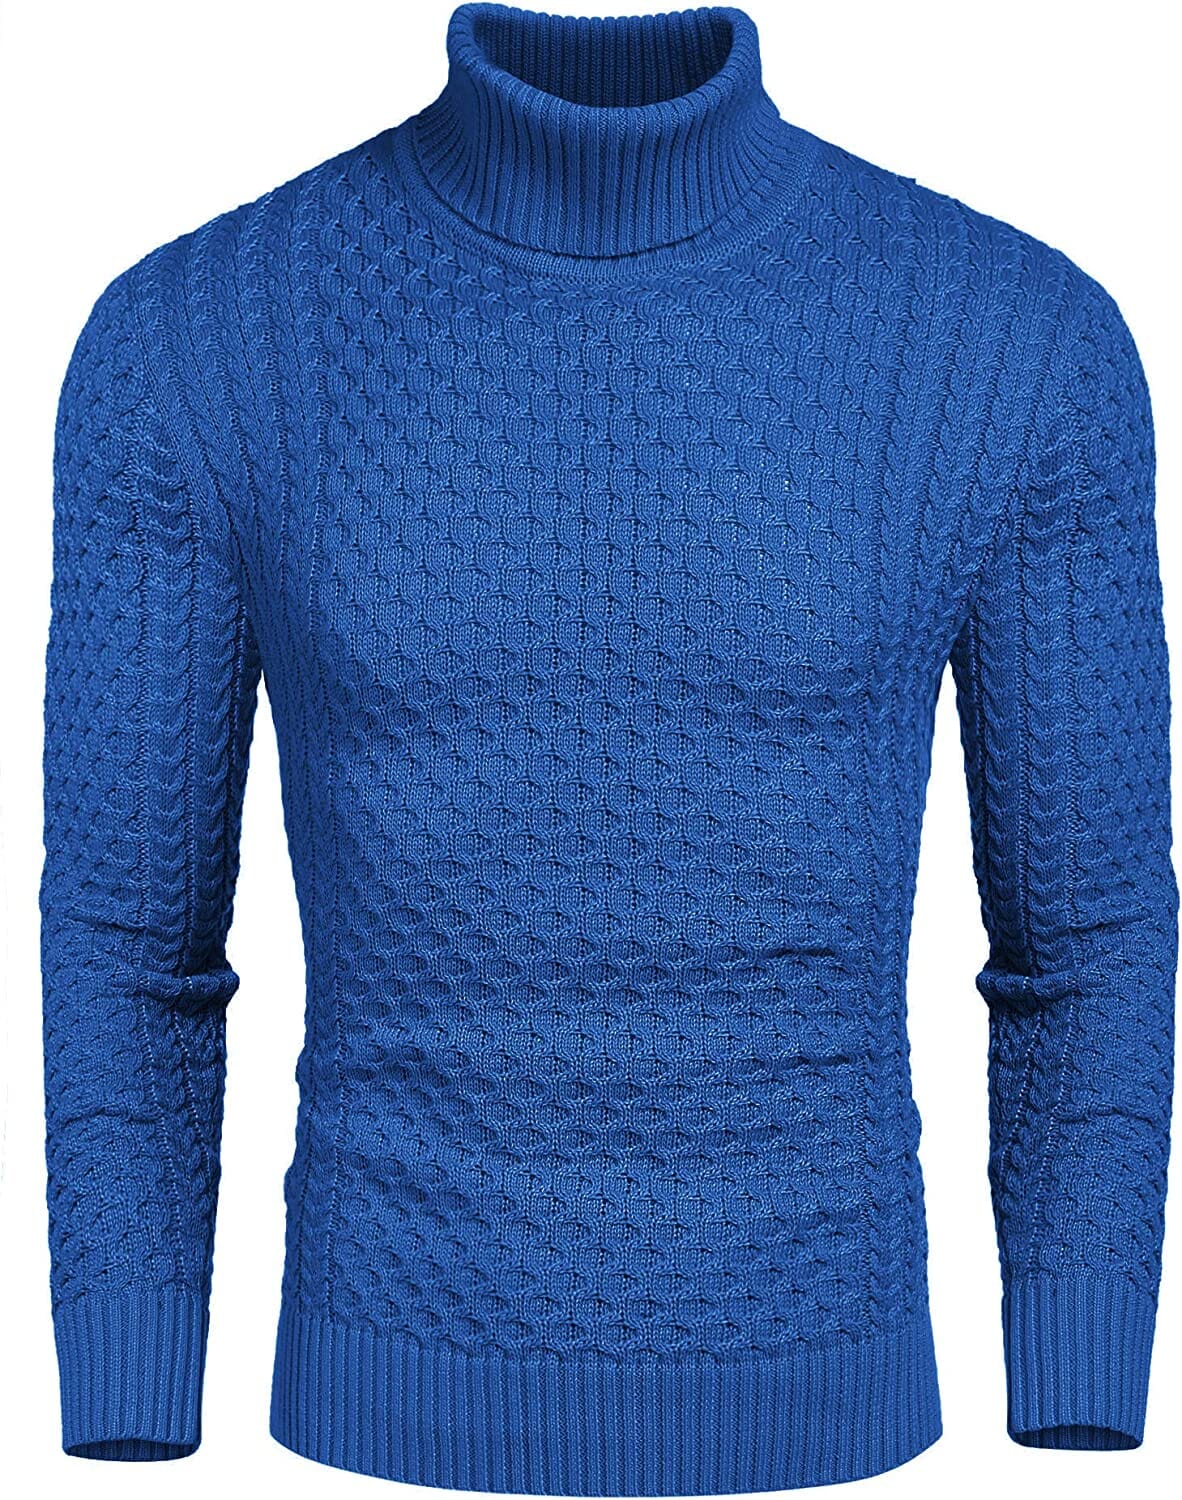 Slim Fit Turtleneck Knitted Twisted Pullover Sweaters (US Only) Sweaters Coofandy's Royal Blue S 